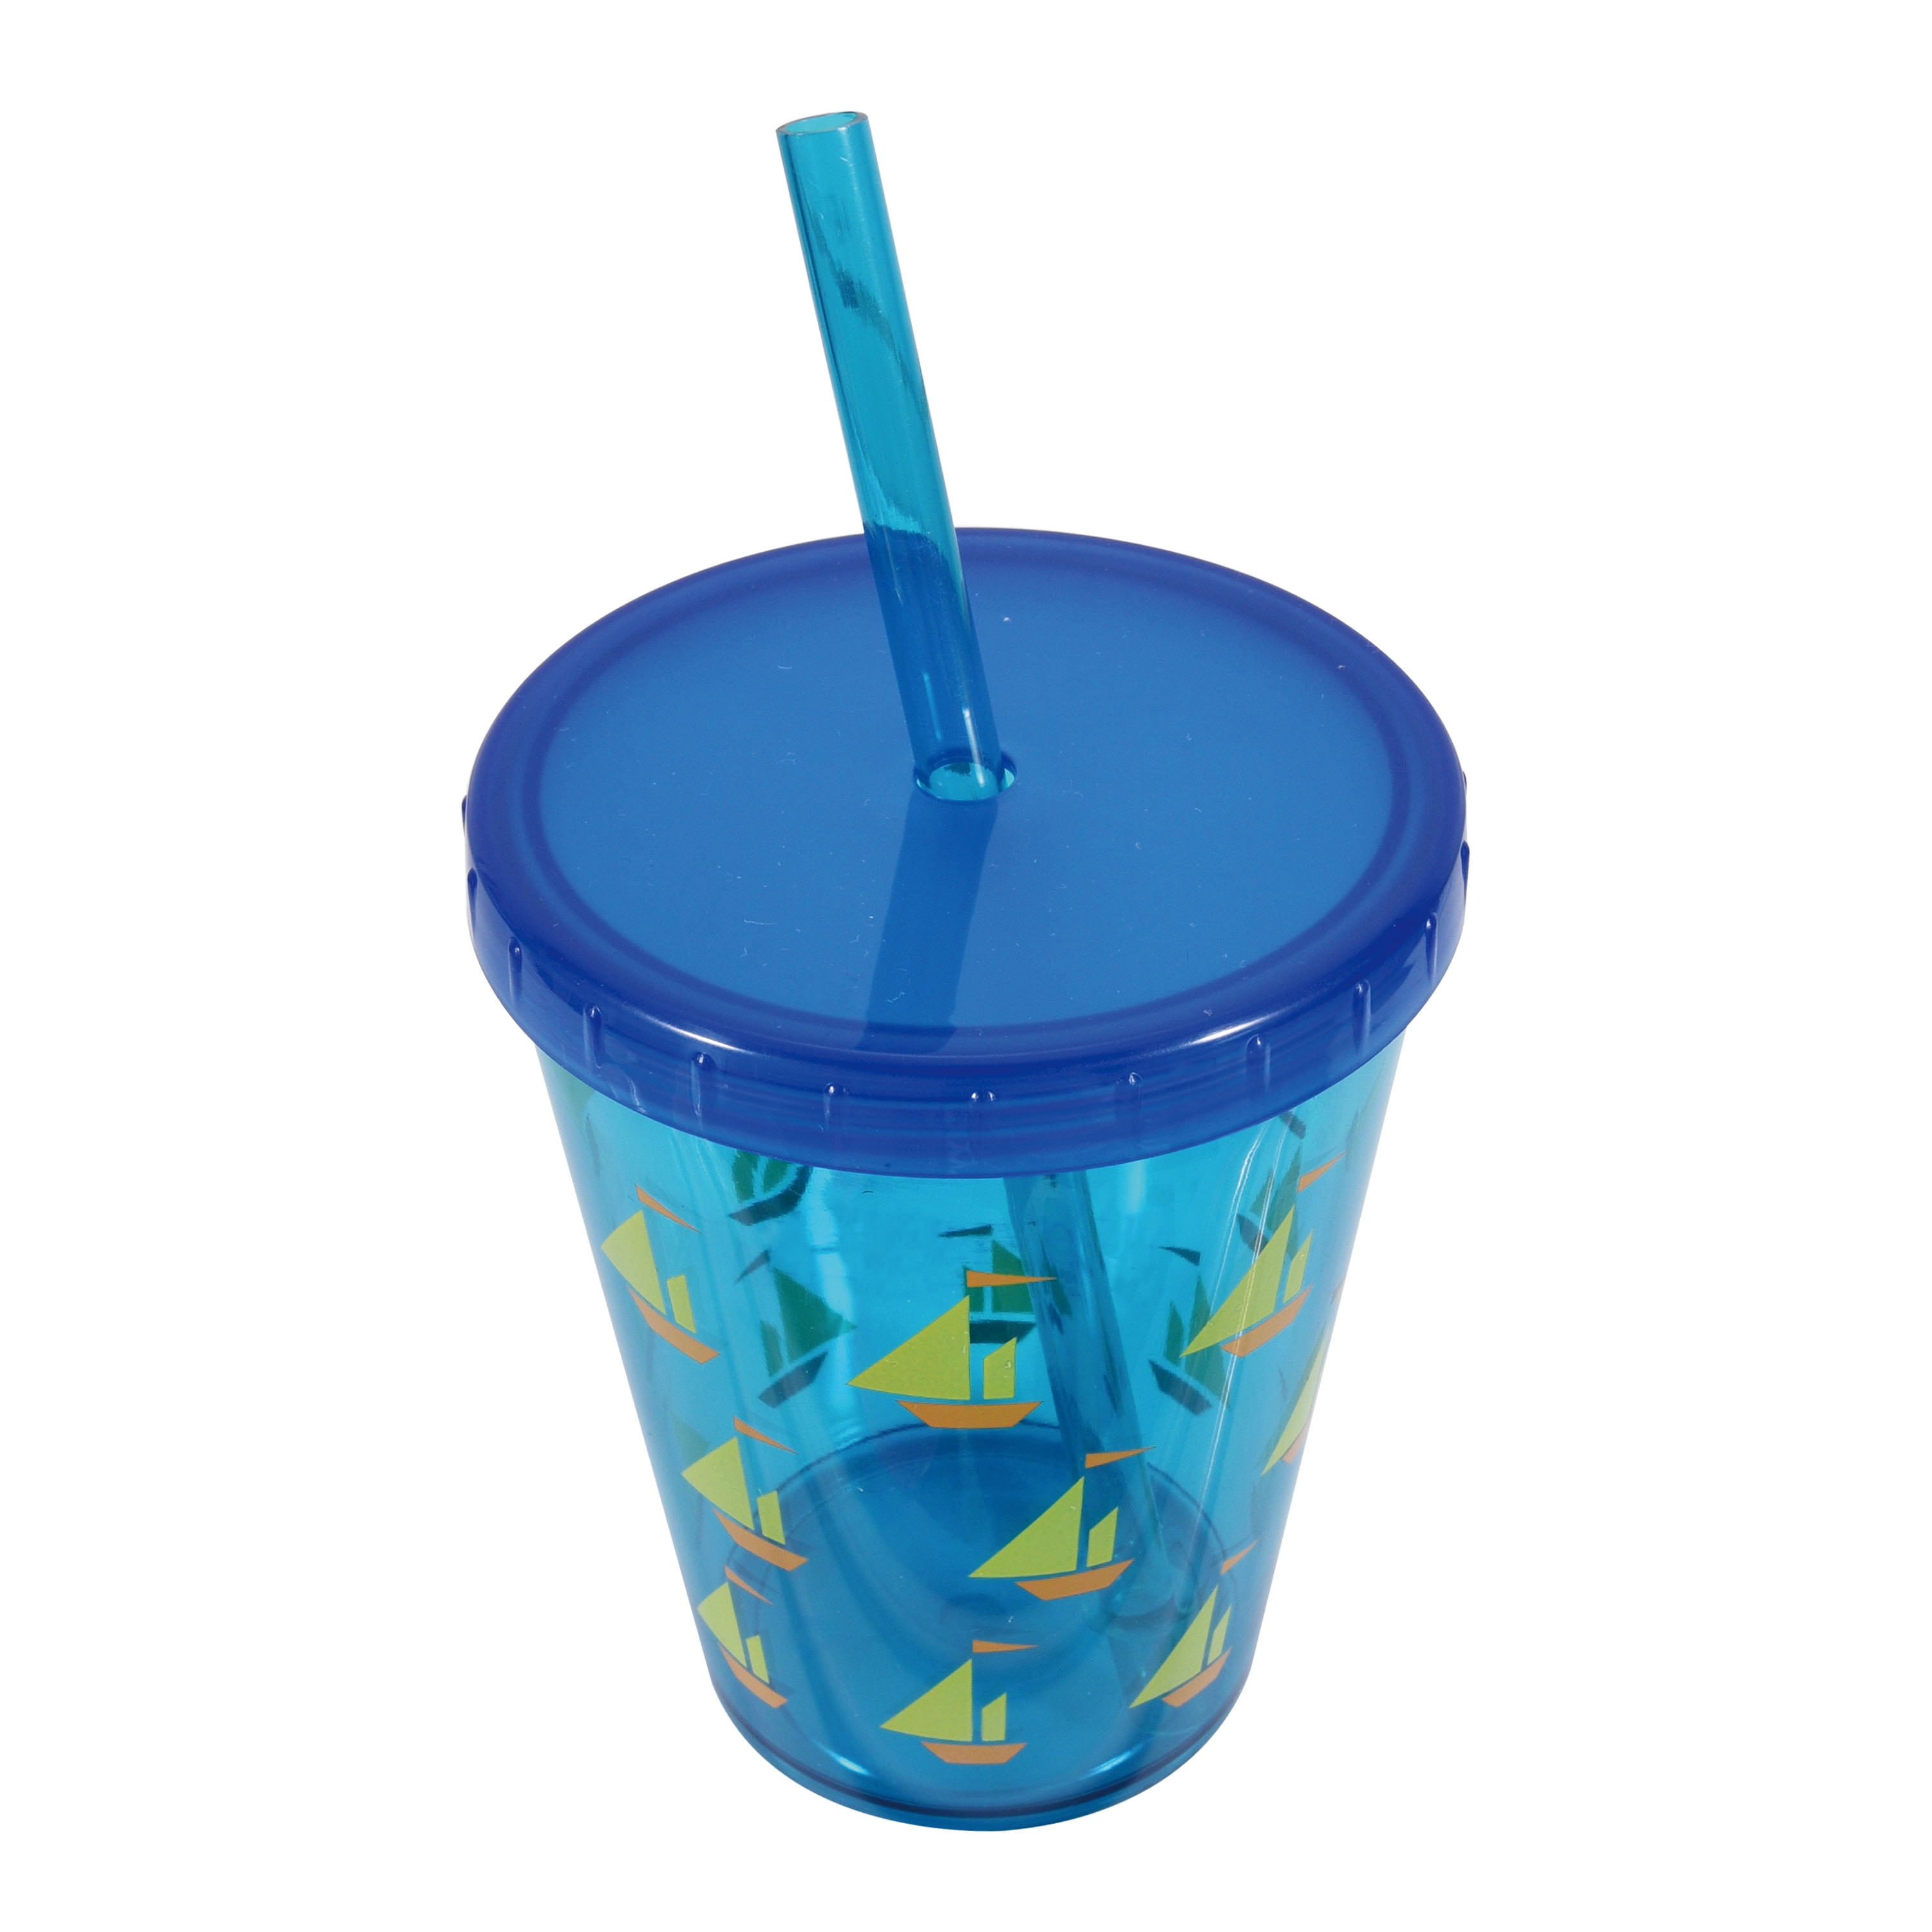 Disassemble the Kids' Tumbler with us! 🙌 Keeping this cup clean